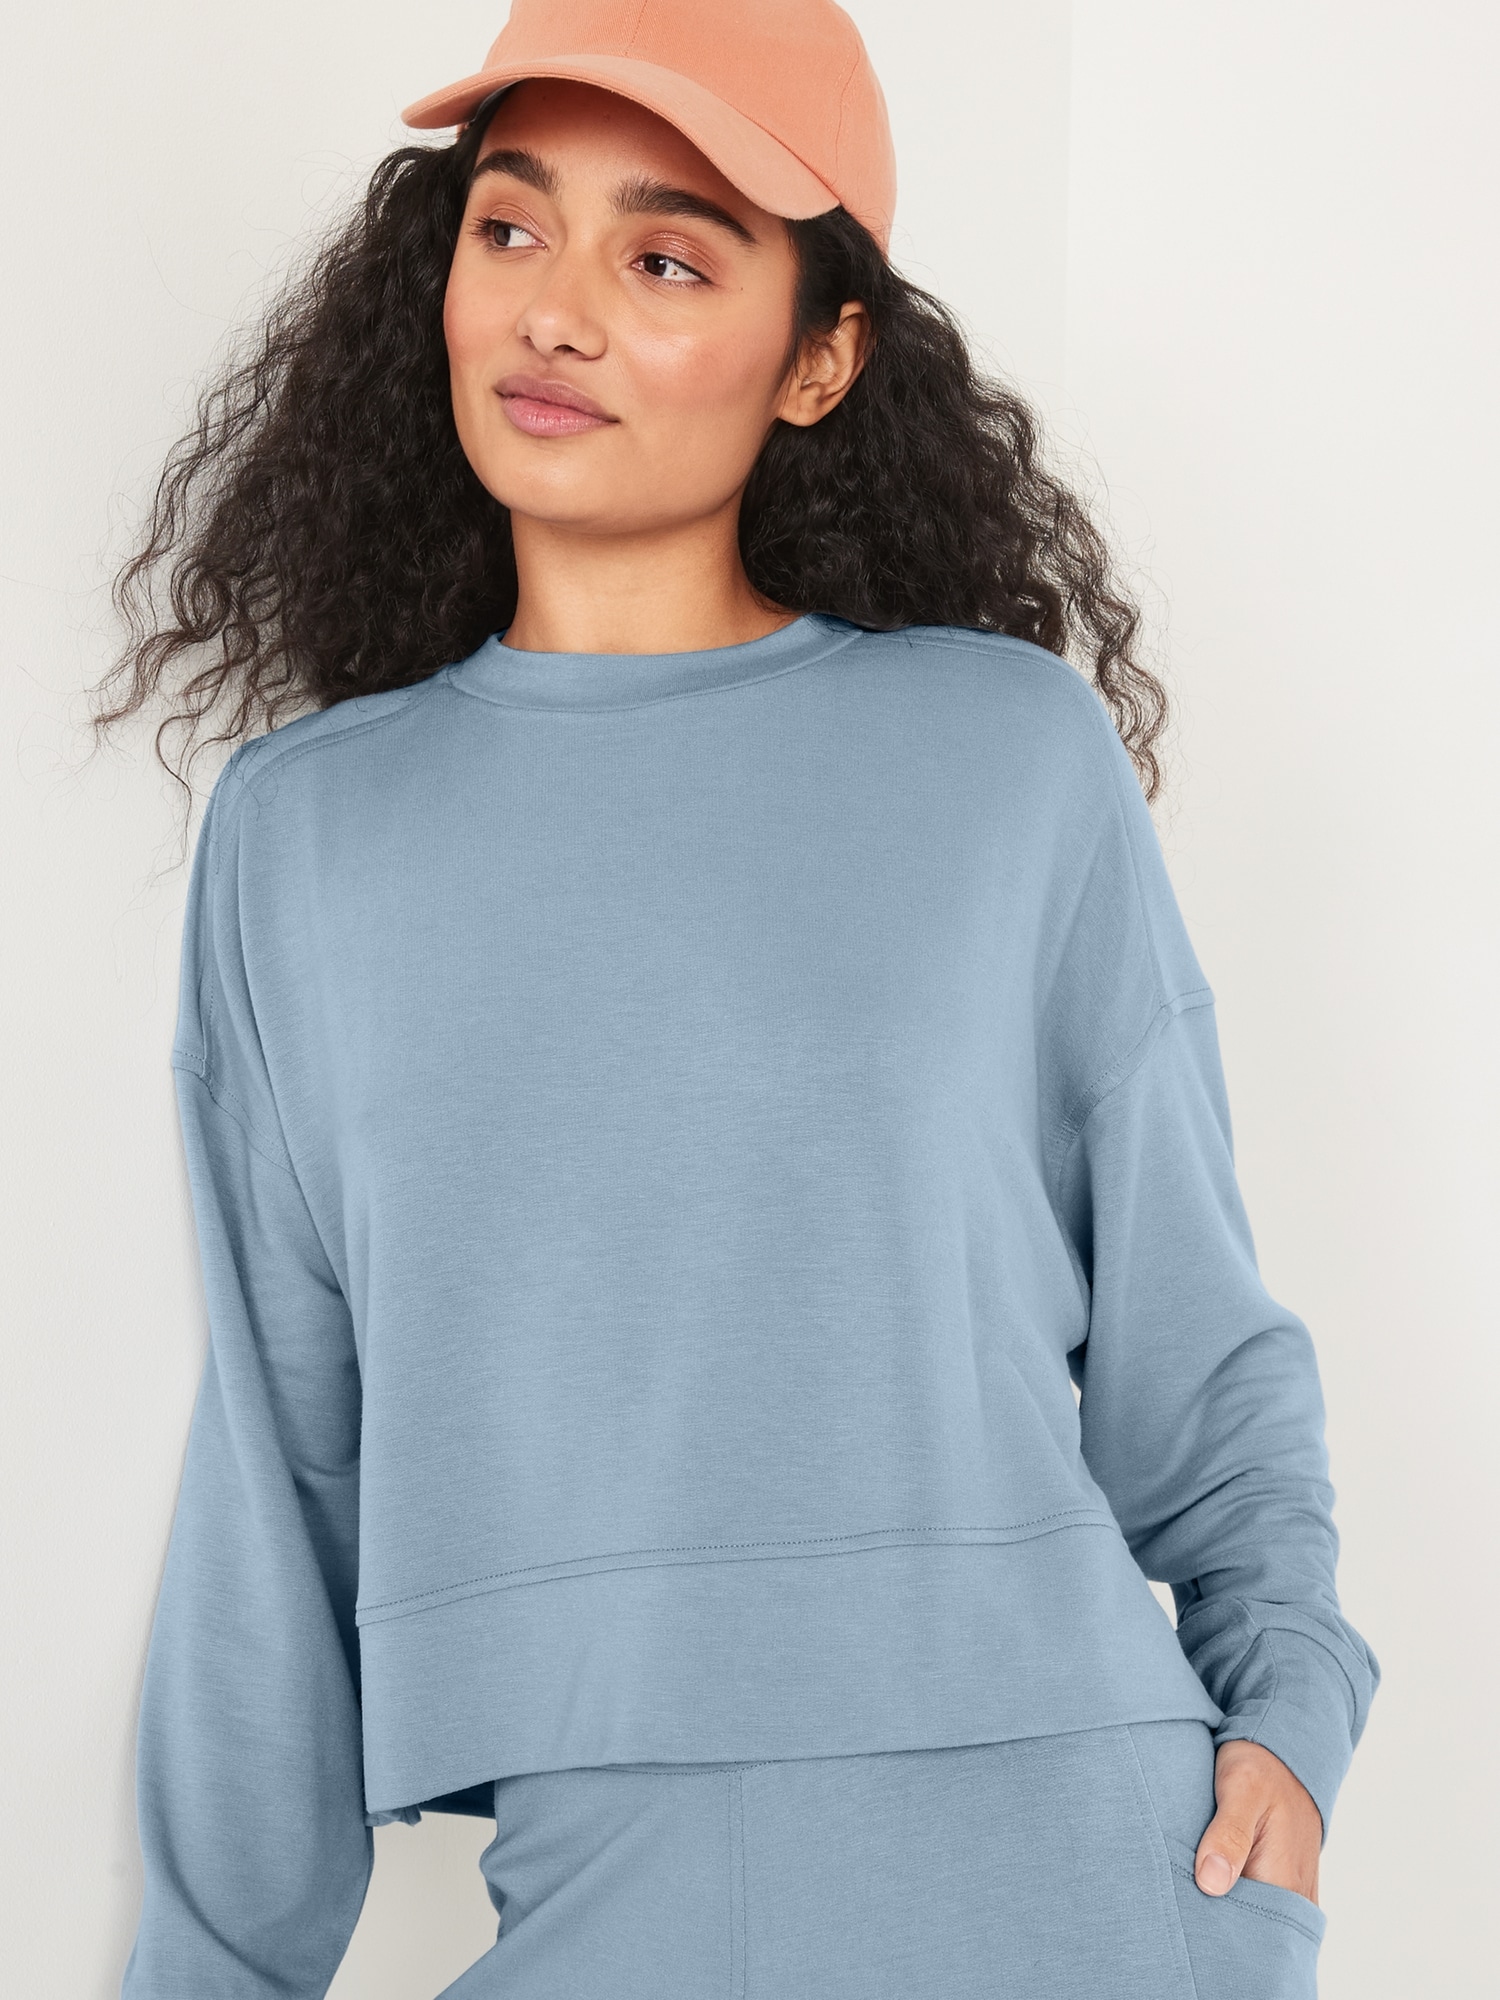 Long-Sleeve Live-In Cropped French-Terry Sweatshirt for Women